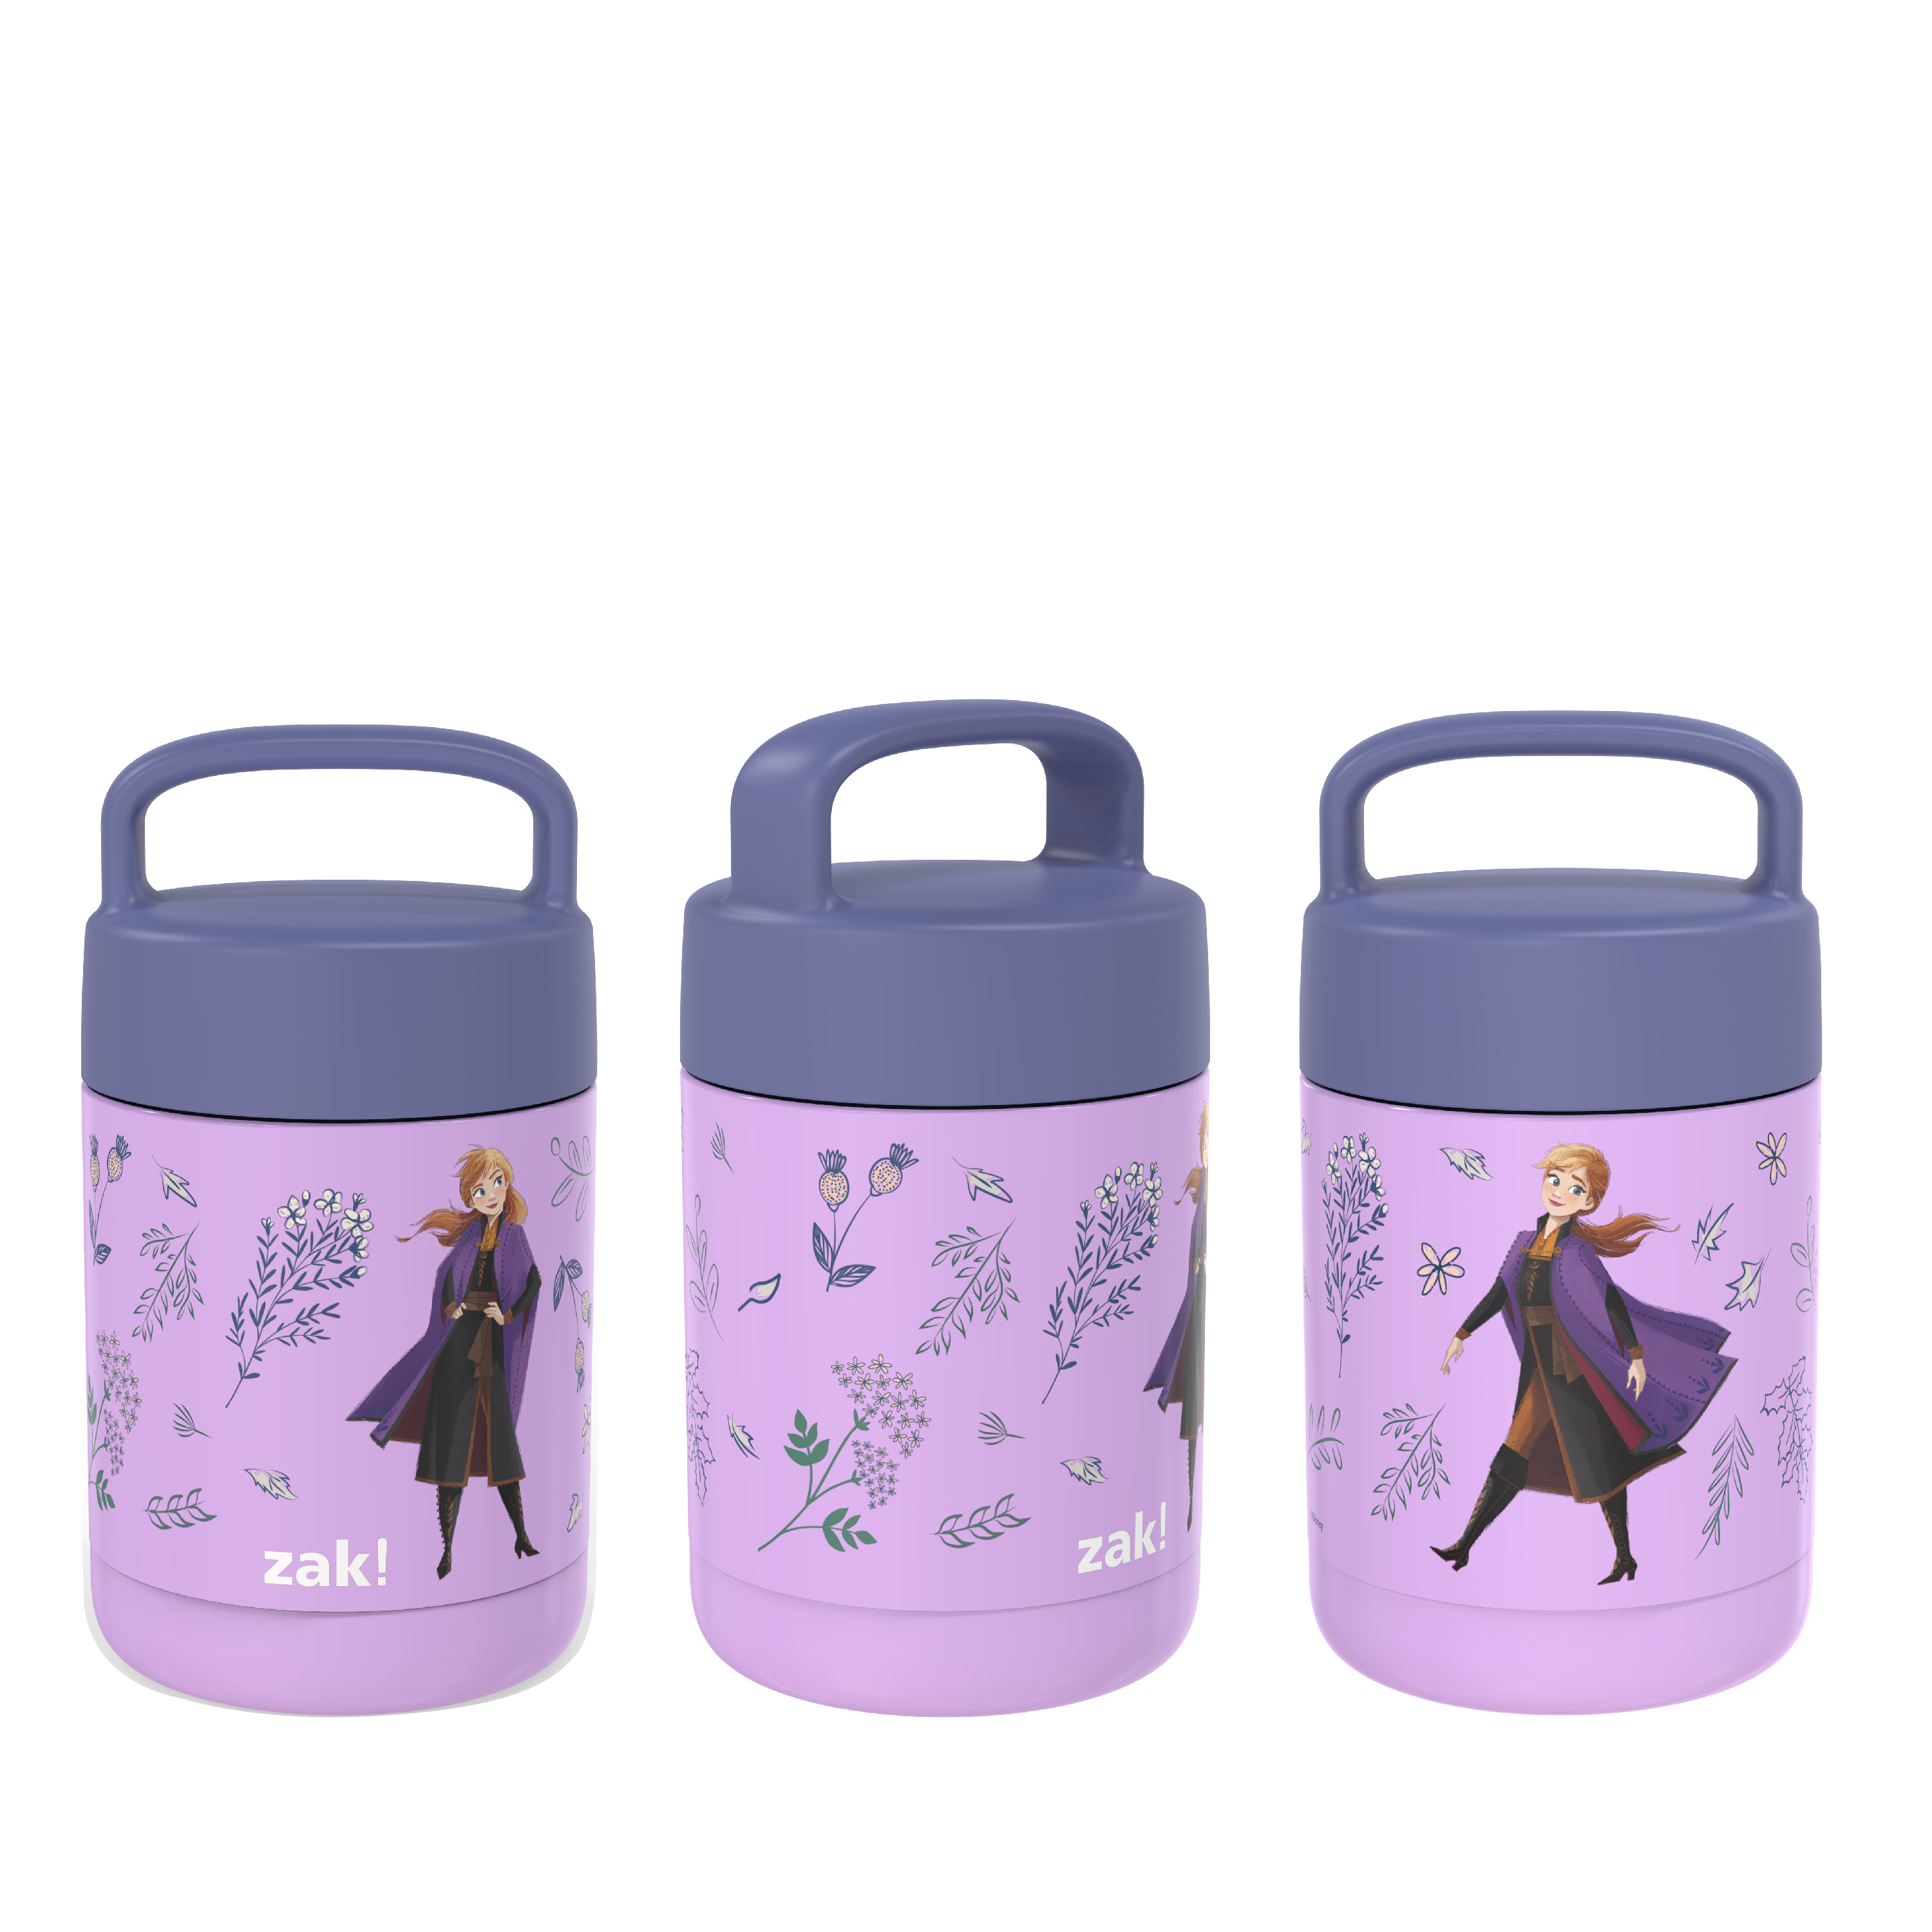 Disney Frozen 2 Movie Reusable Vacuum Insulated Stainless Steel Food Container, Princess Anna slideshow image 8